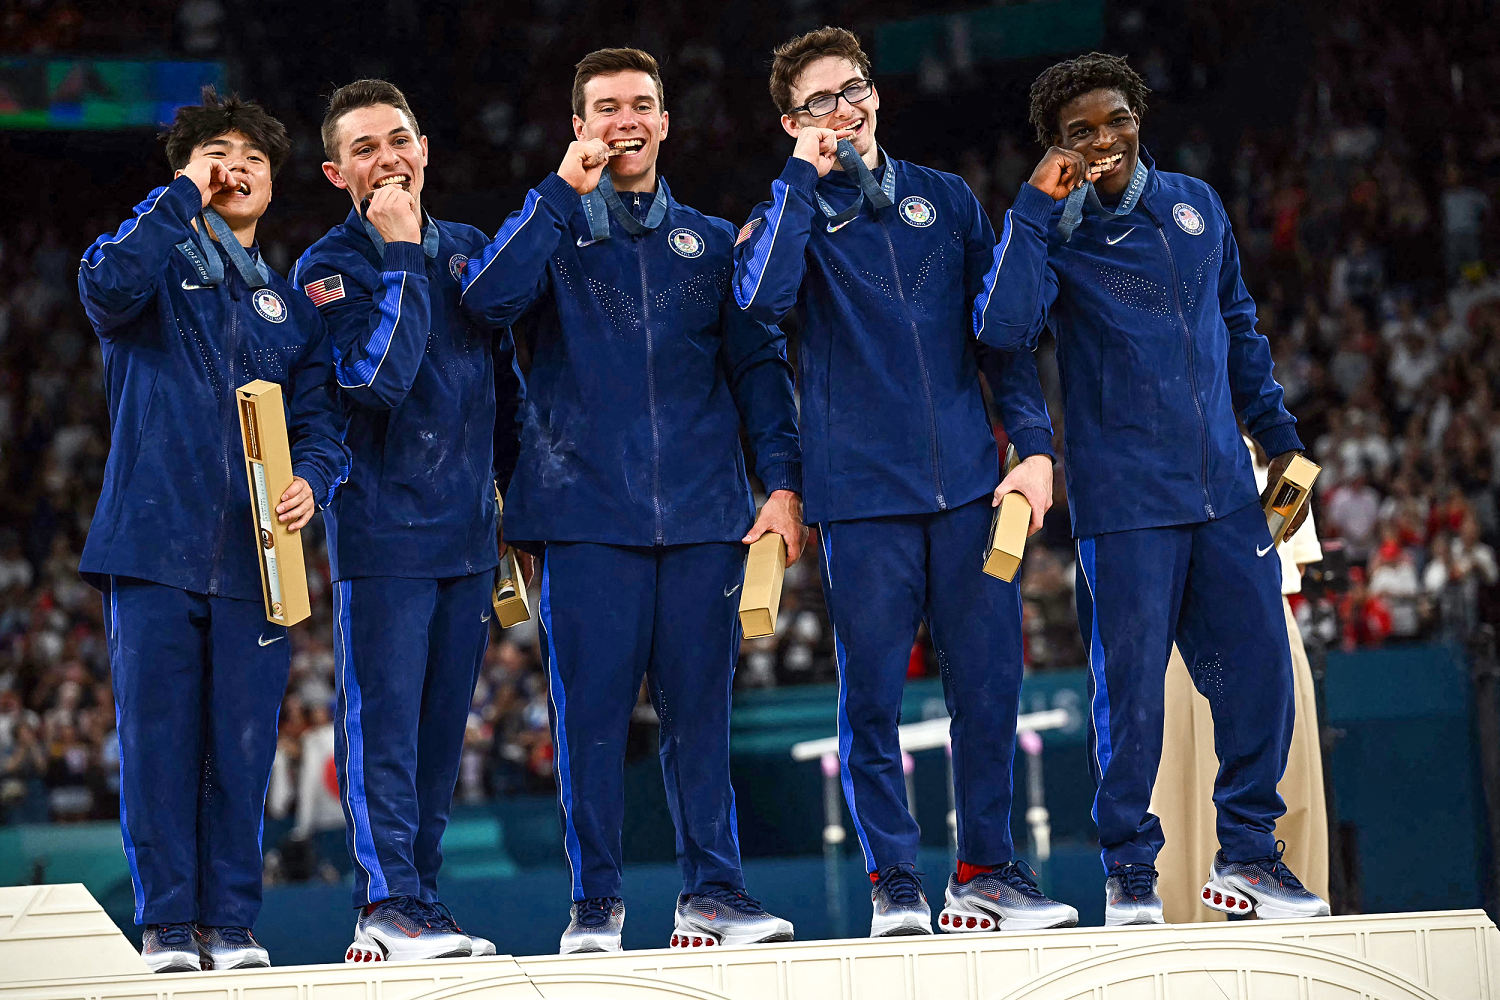 U.S. men's gymnastics team wins bronze, earning first Olympic team medal in 16 years